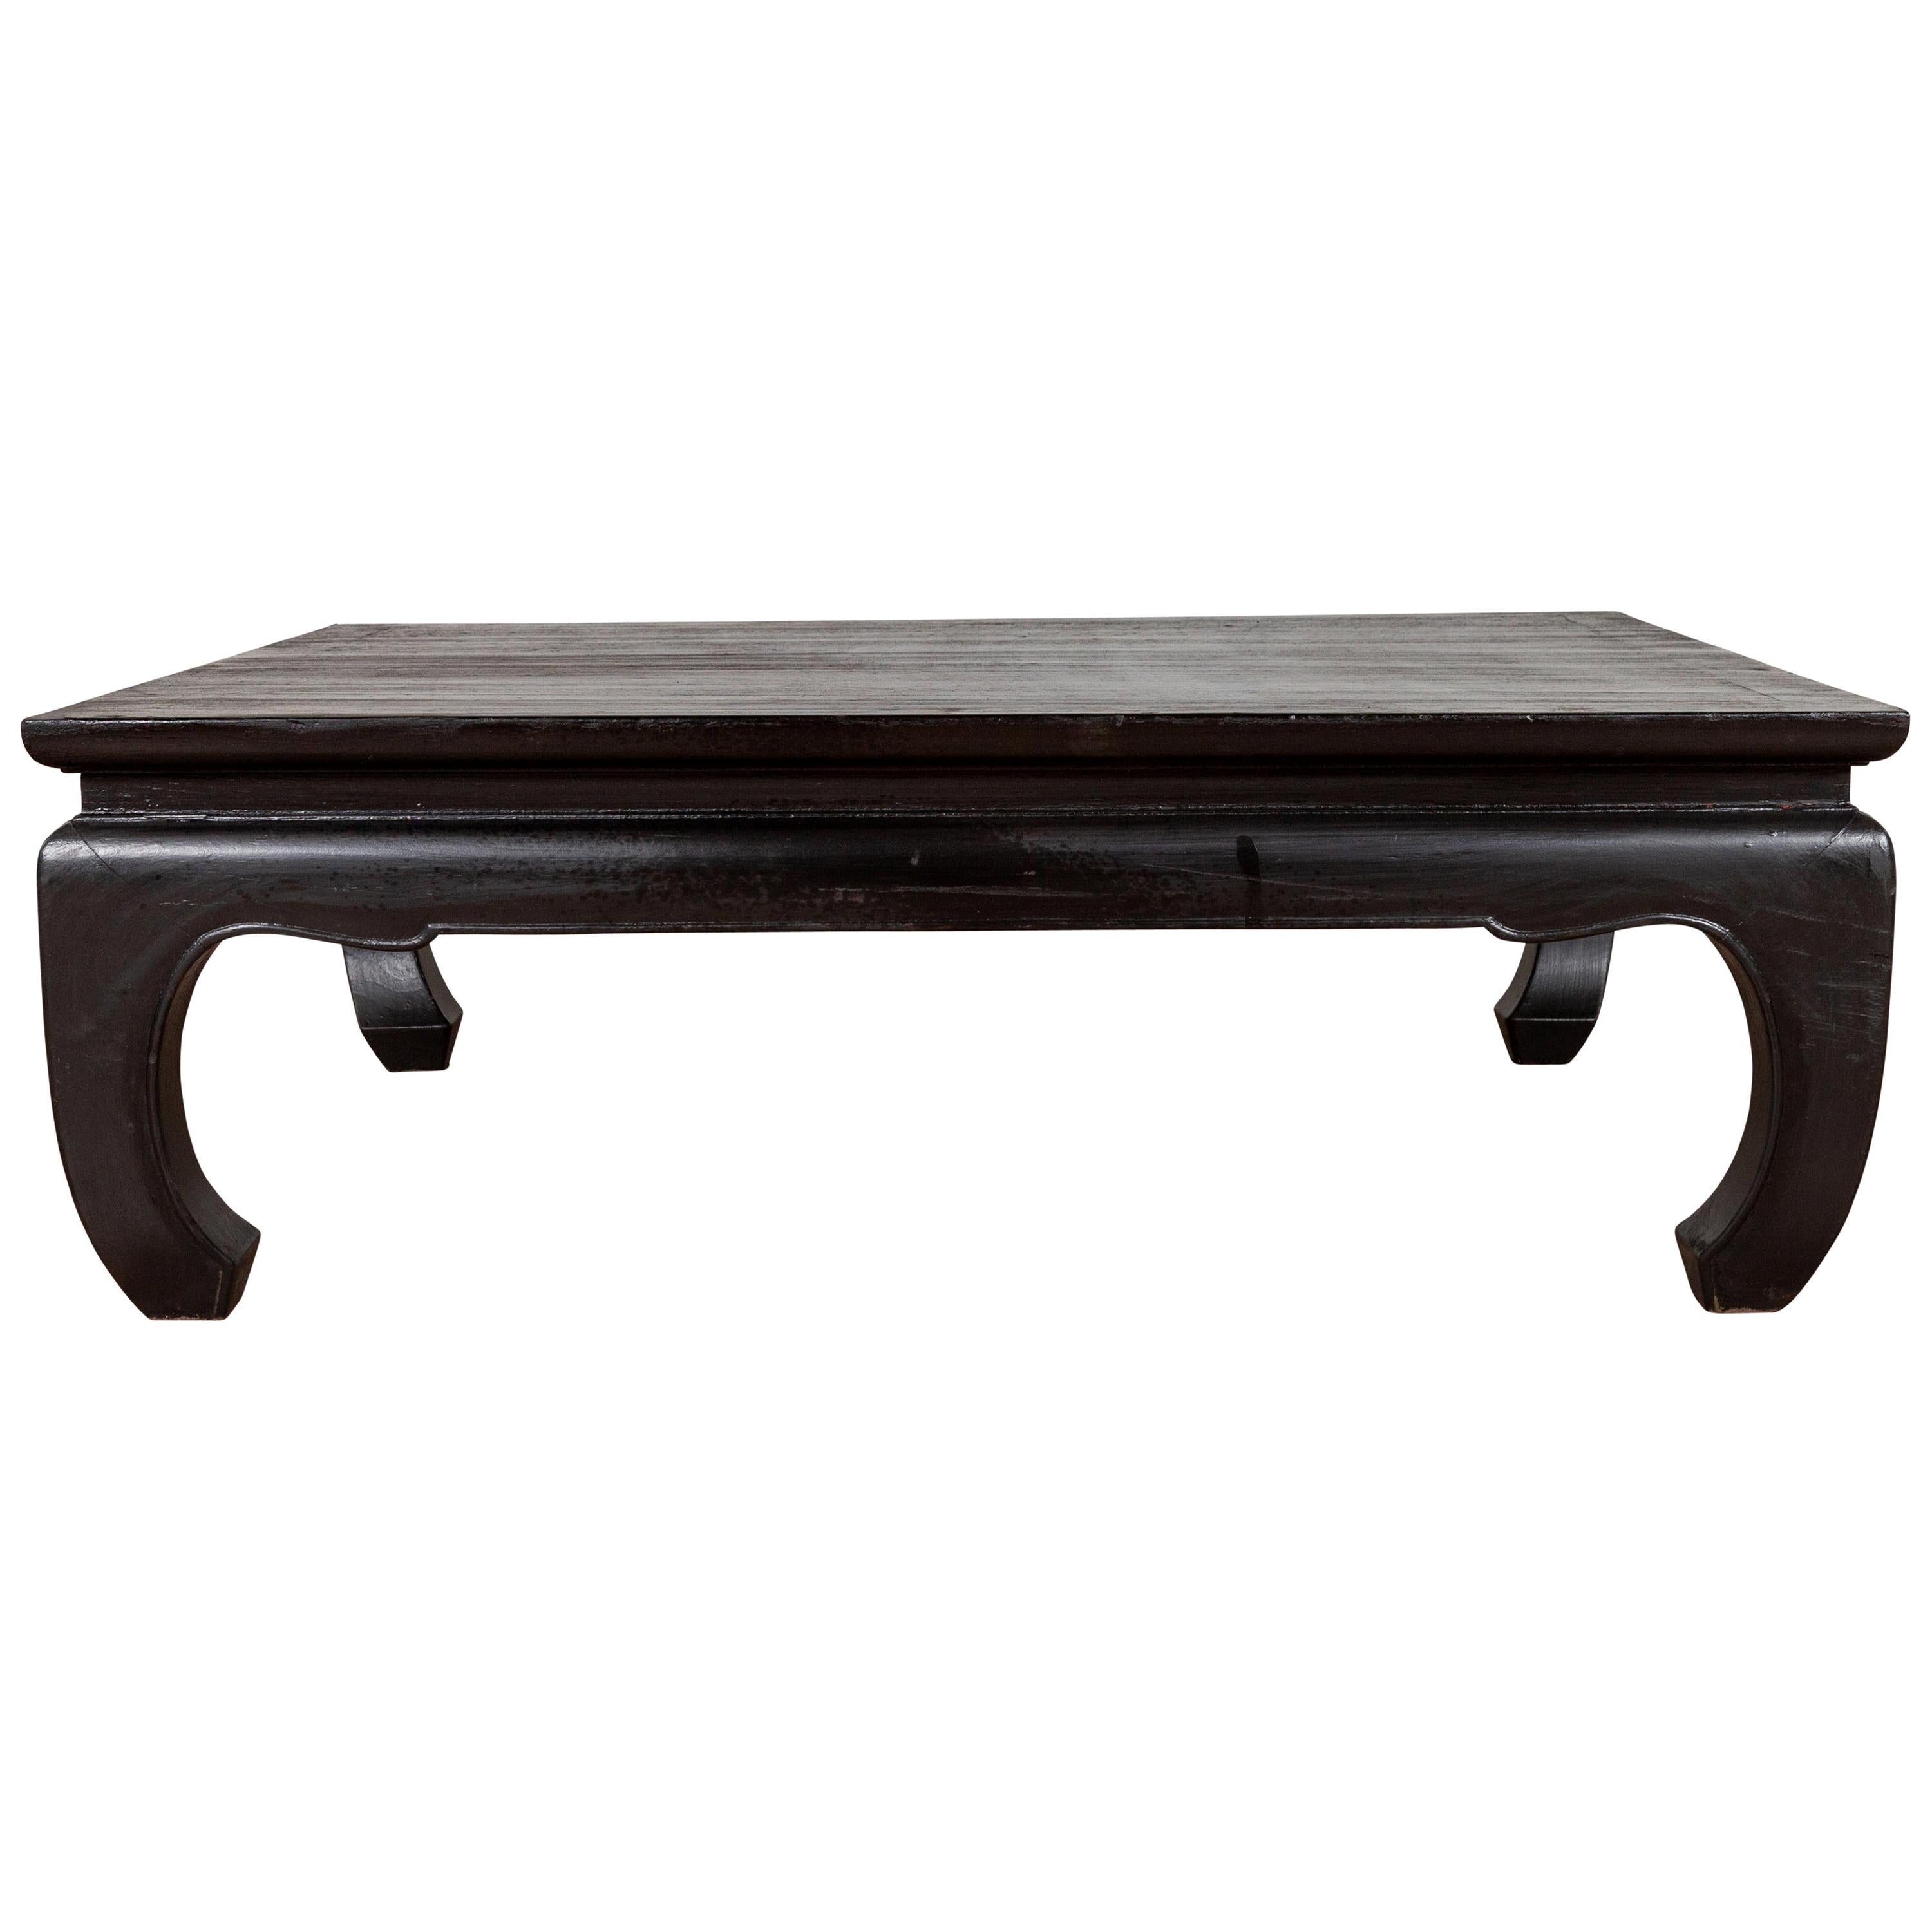 Thai Teak Vintage Coffee Table with Black Lacquer and Chow Legs and Horsehoof